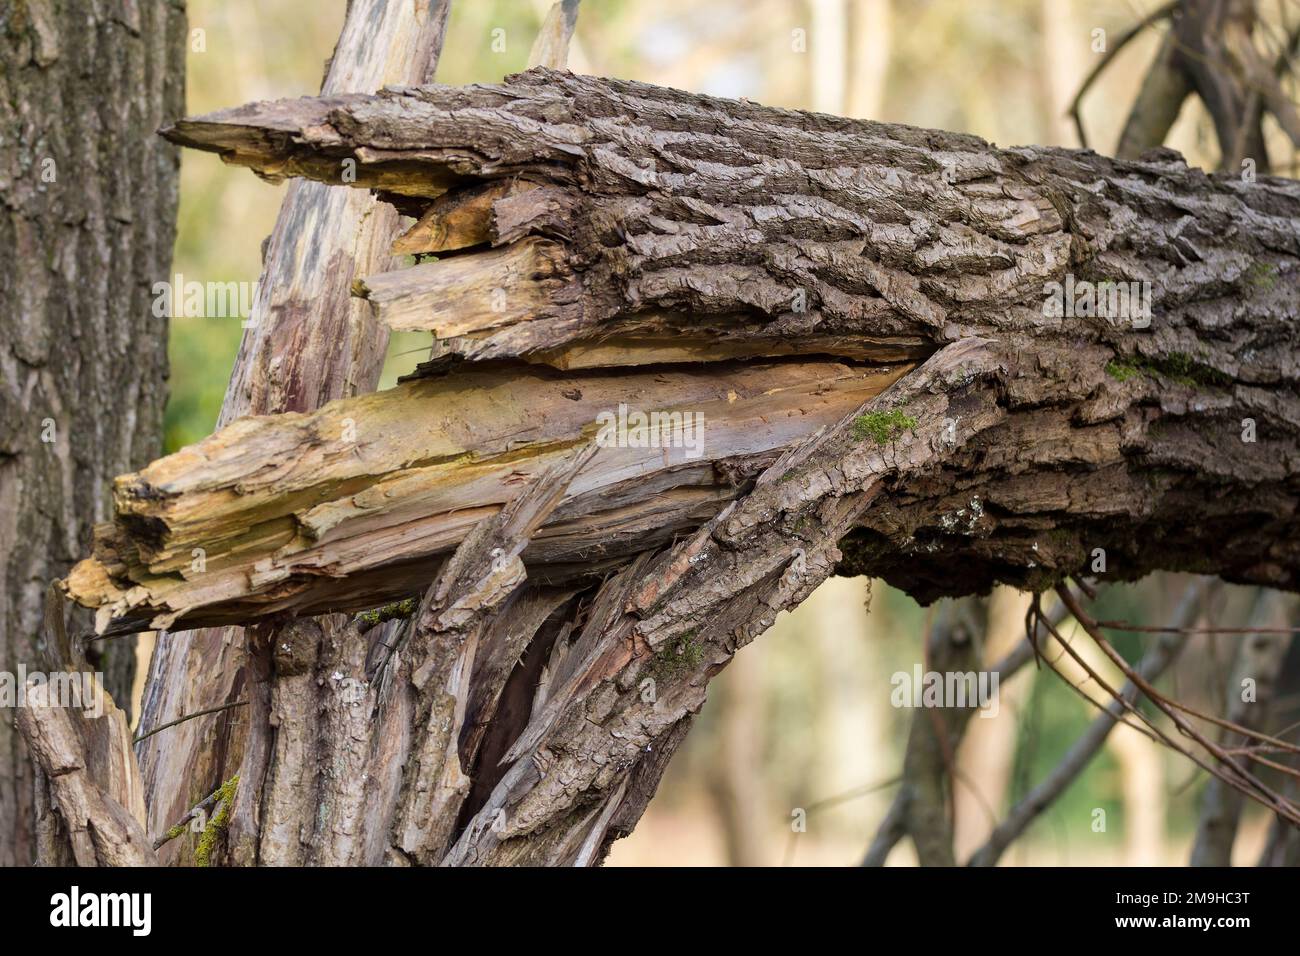 Tree trunk broken by high winds in forest near river has coarse bark and pale yellowish inner wood splintered and resting at 90 degrees on other trees Stock Photo